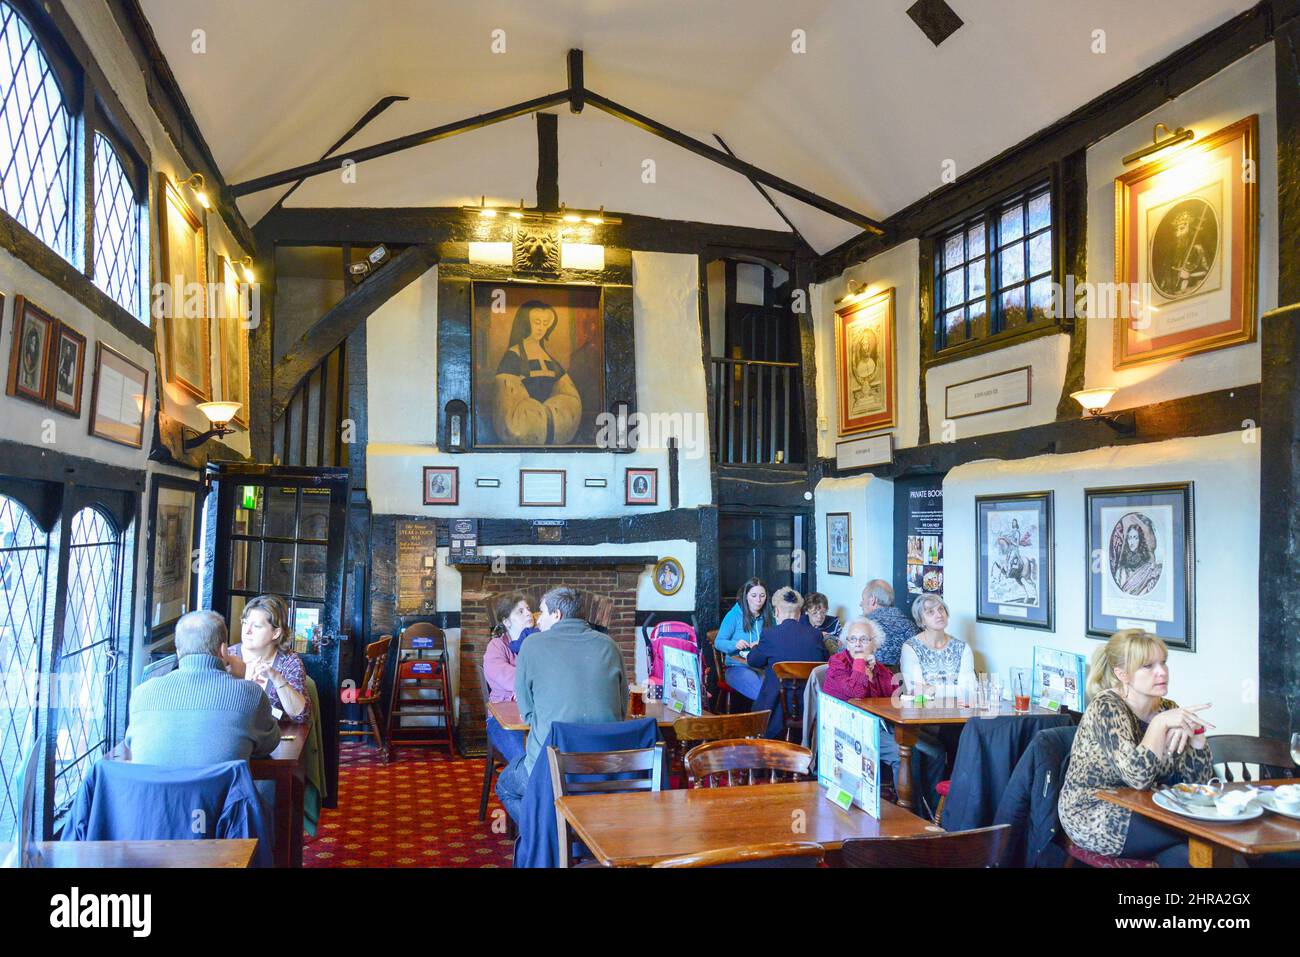 The Old Banquet Hall at 17th century The Old Manor pub, The Ring, Bracknell, Berkshire, England, United Kingdom Stock Photo